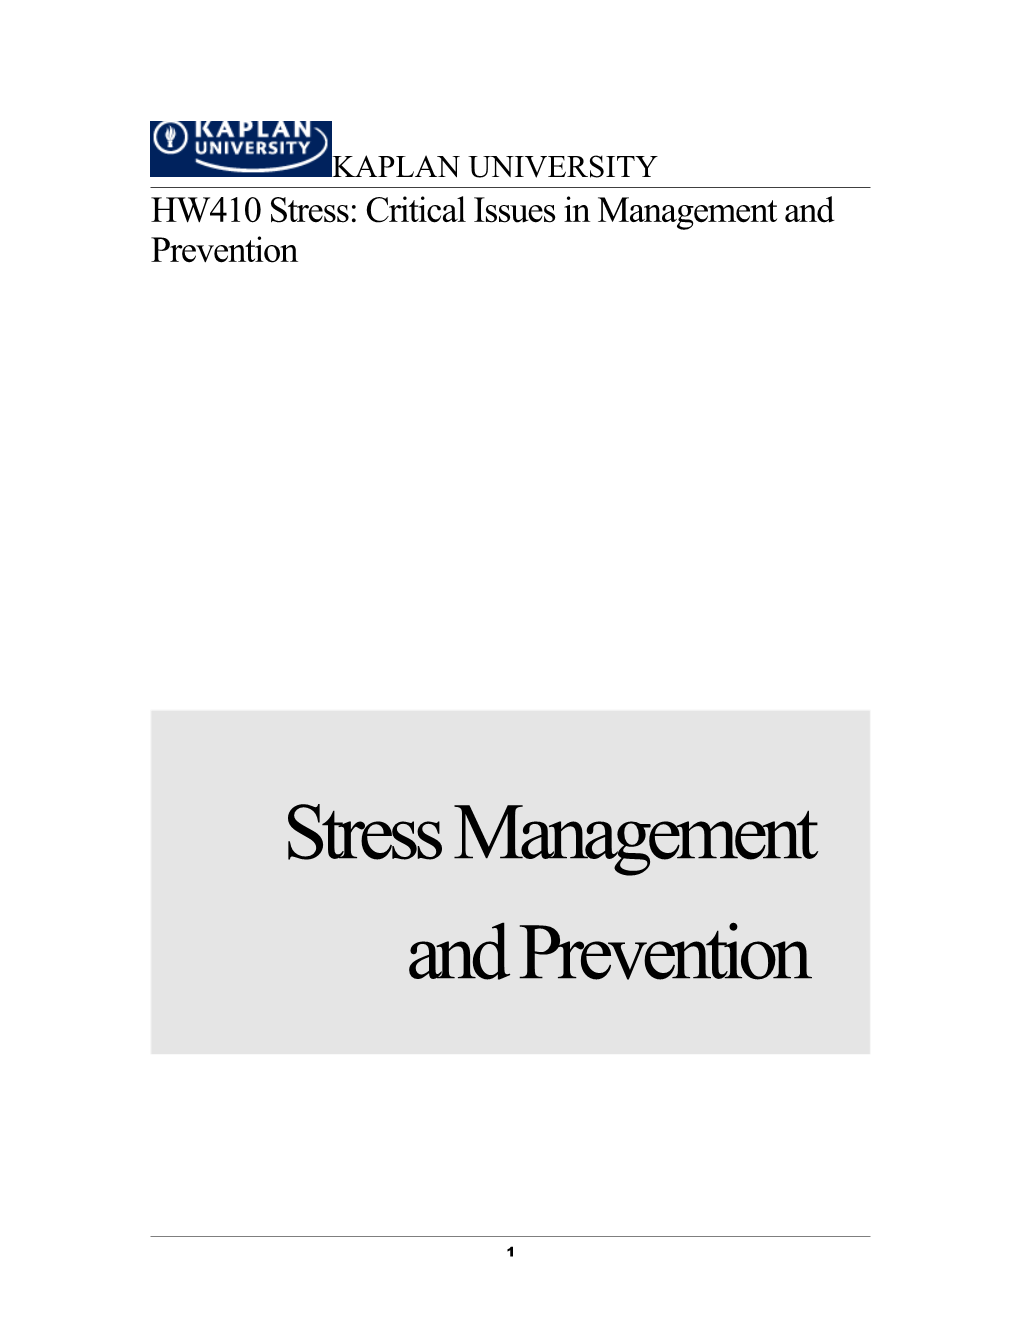 Hw410stress: Critical Issues in Management and Prevention